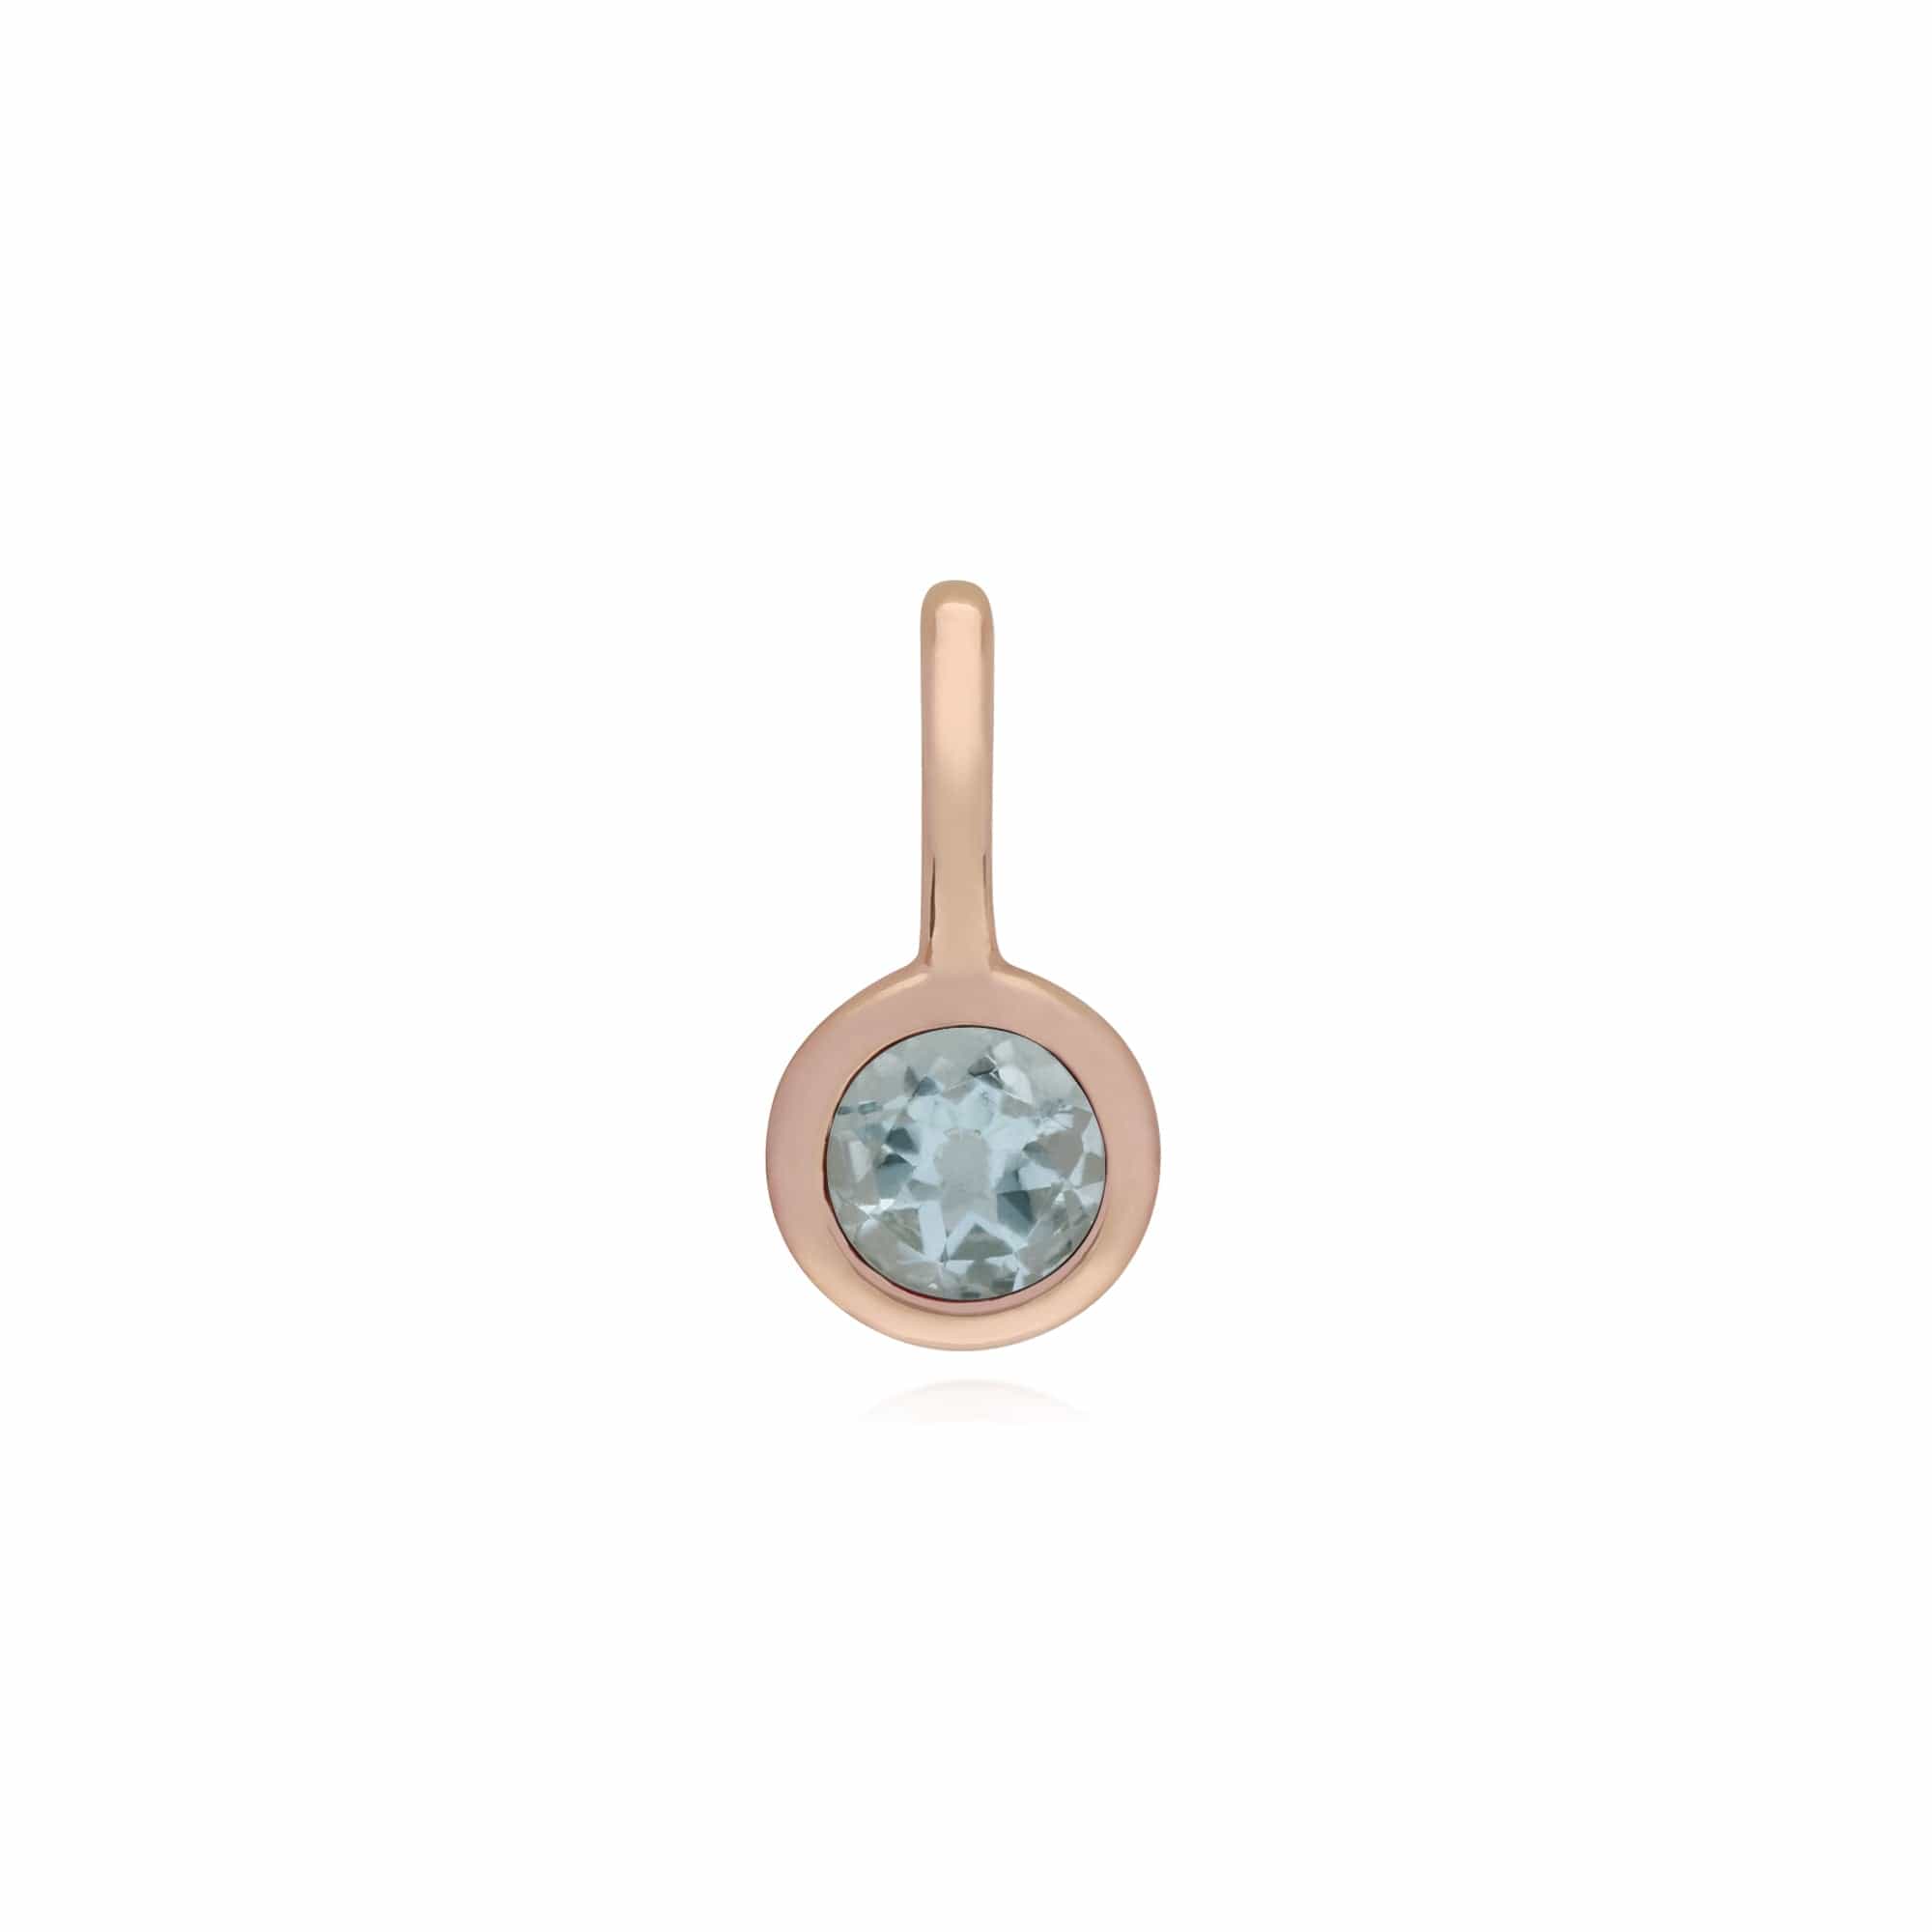 270P027307925-270P026901925 Classic Heart Lock Pendant & Aquamarine Charm in Rose Gold Plated 925 Sterling Silver 2